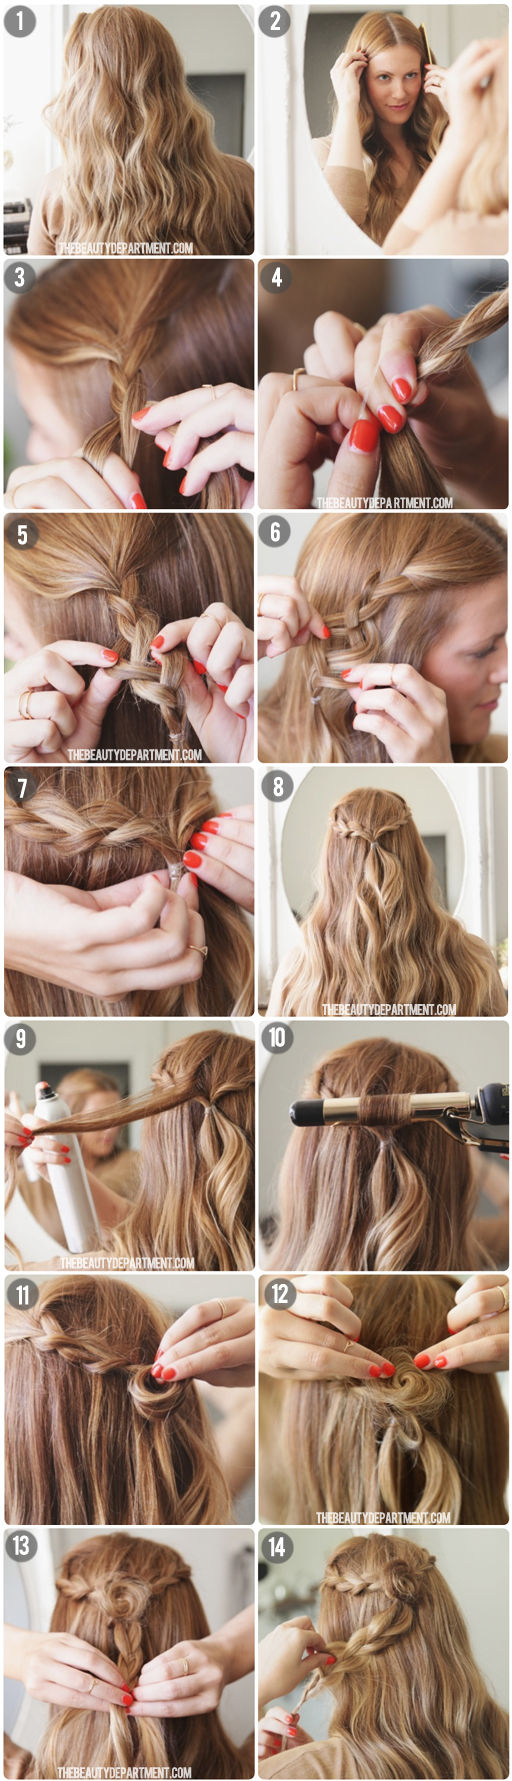 18 Great Hairstyle Ideas and Tutorials for Perfect Holiday Look (11)